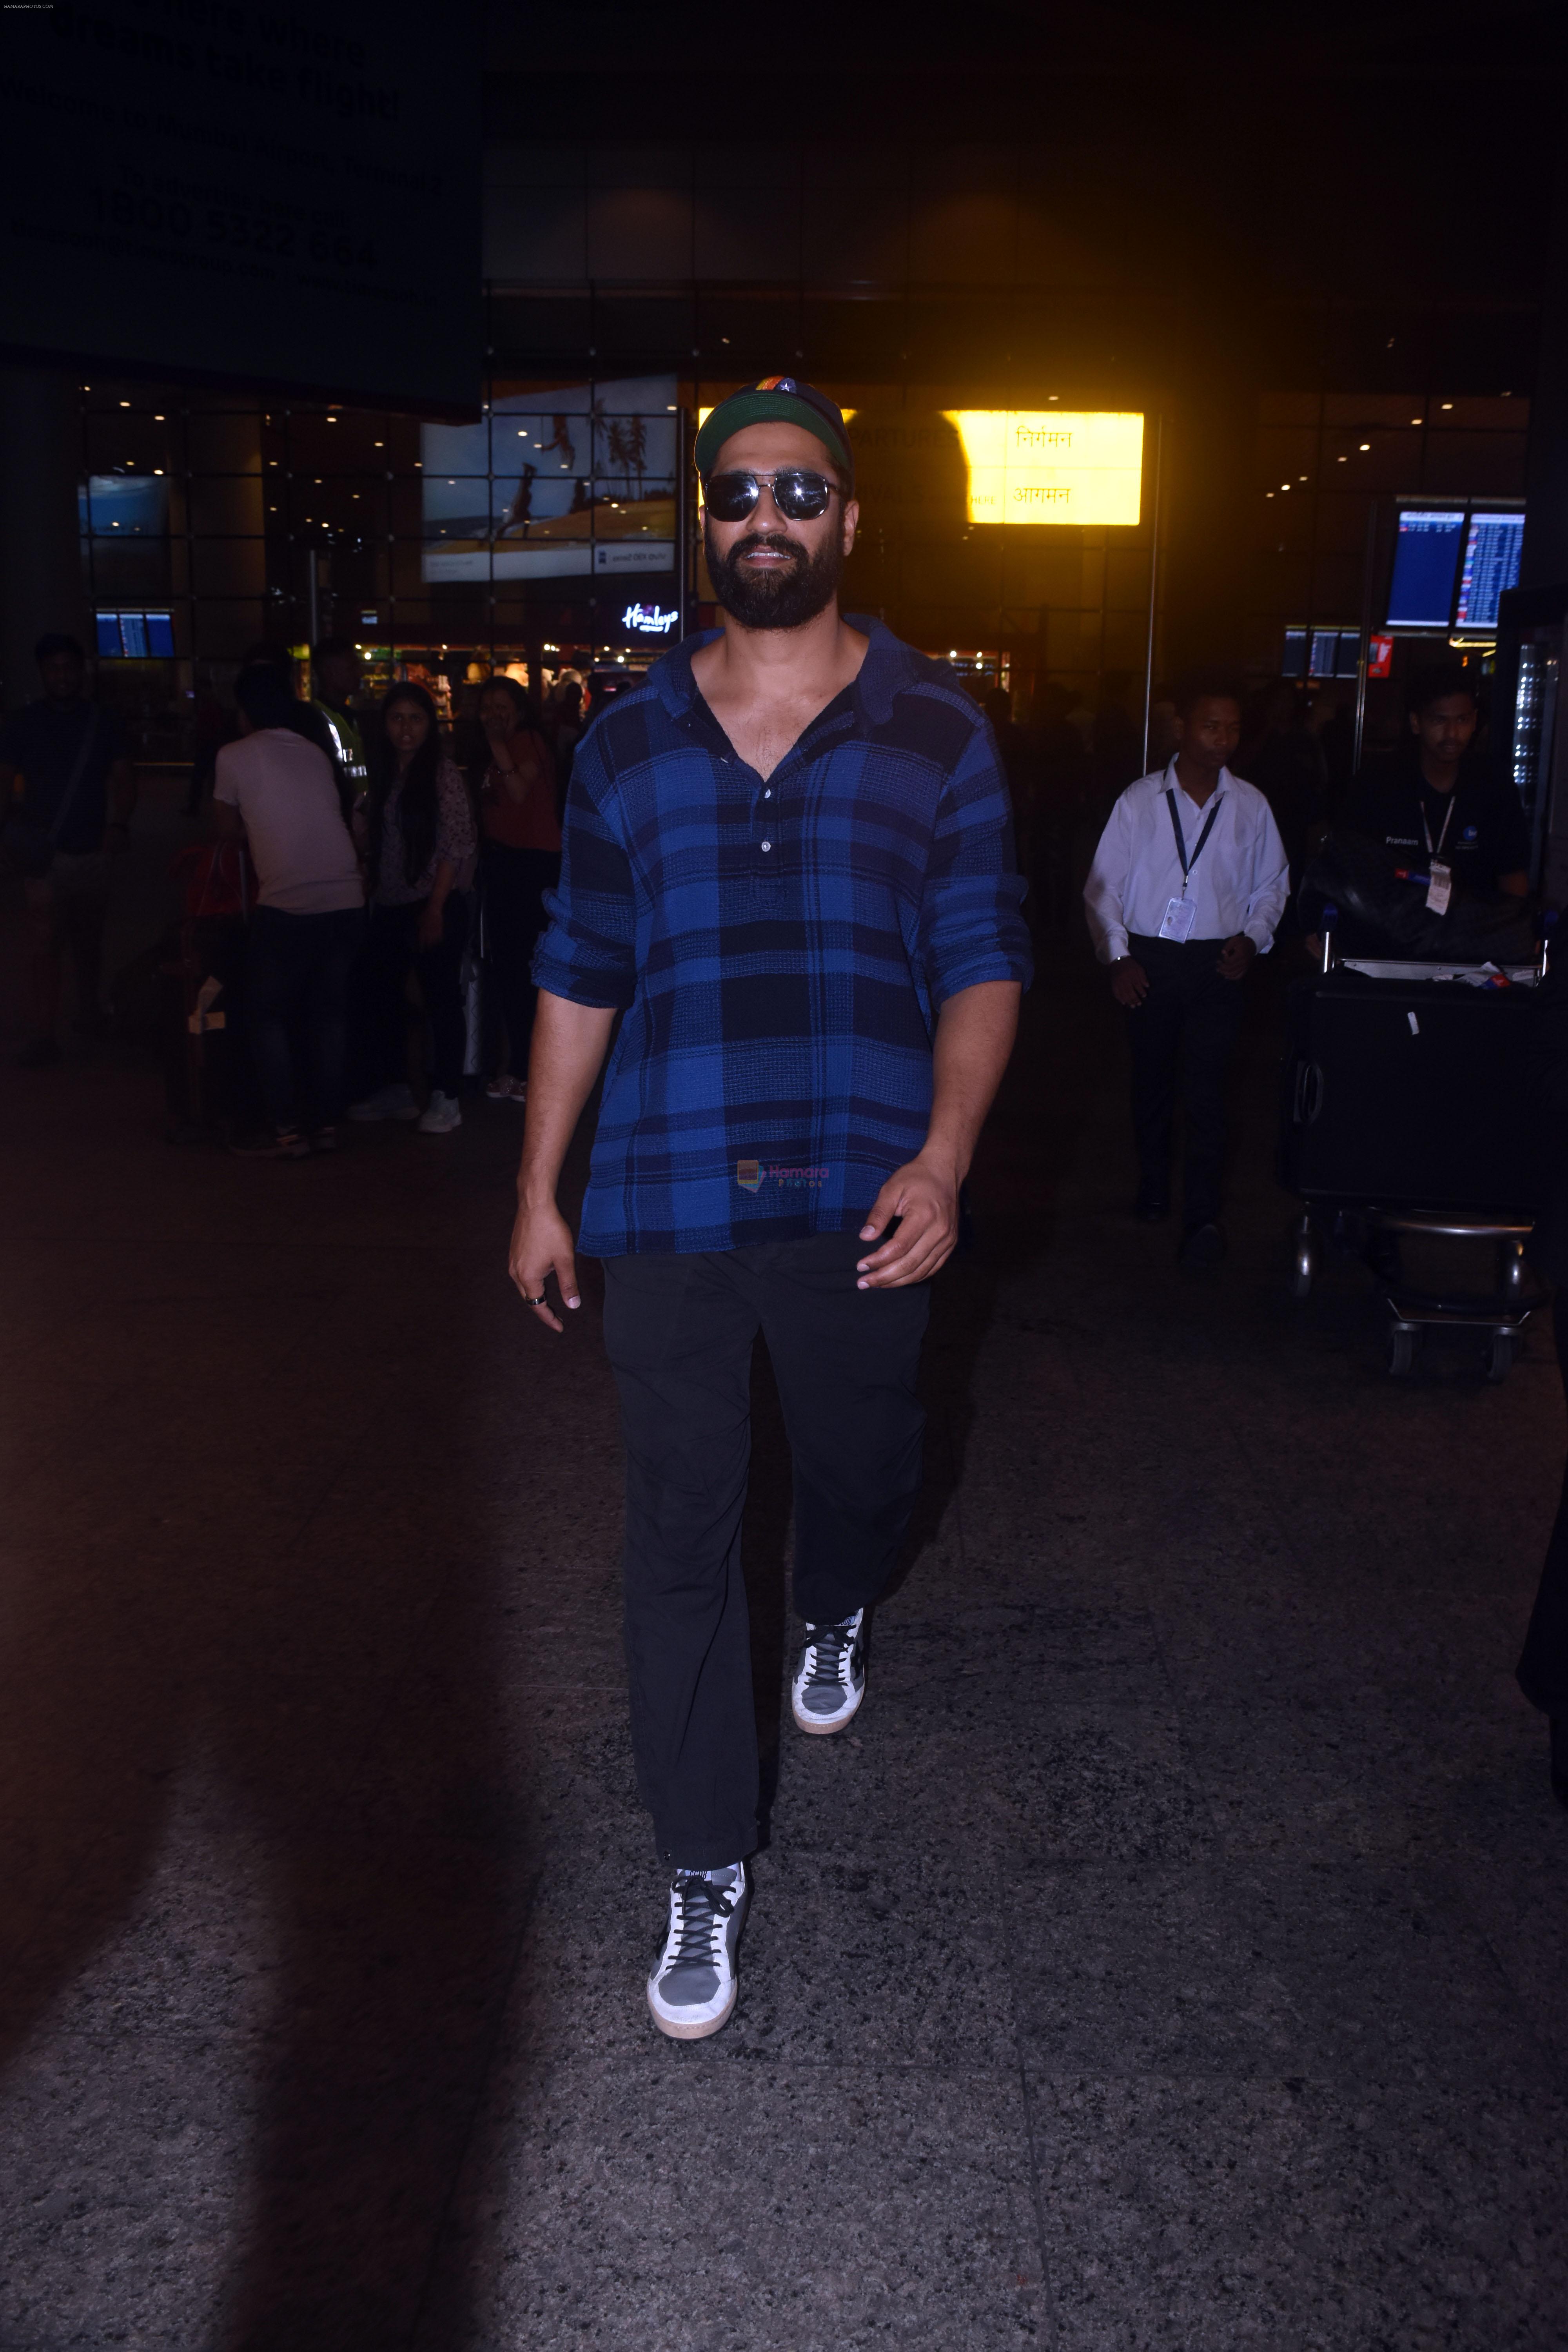 Vicky Kaushal seen in goggles at the airport on wee hours of 2 July 2023